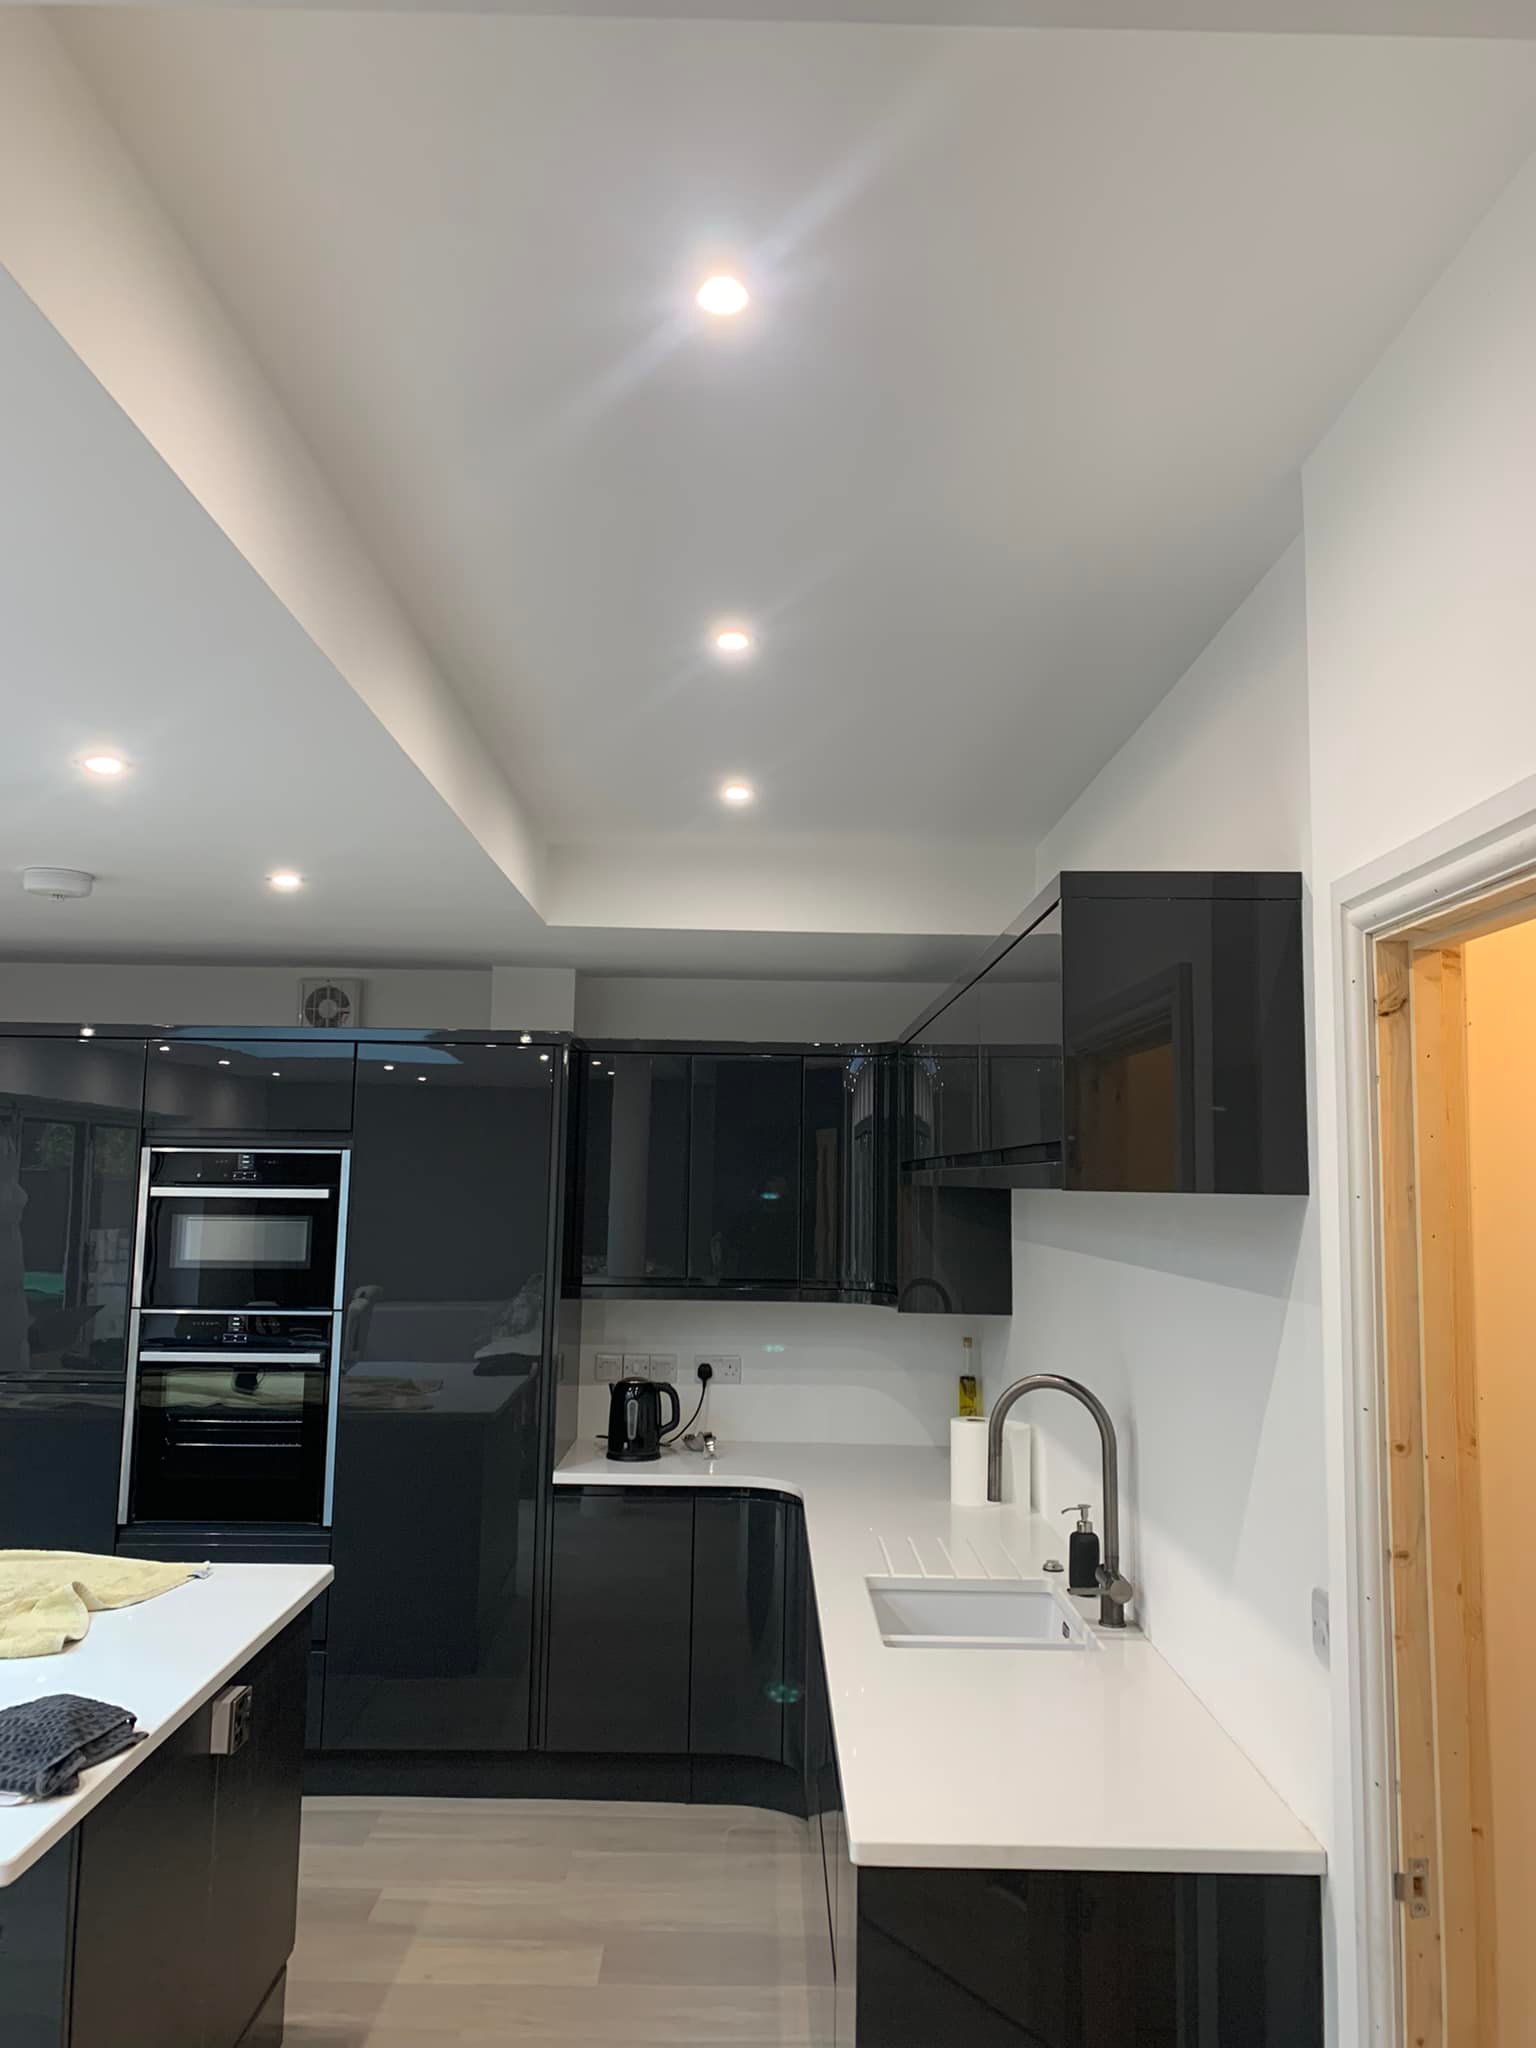 Black kitchen cupboard and a white ceiling with LEDs in it